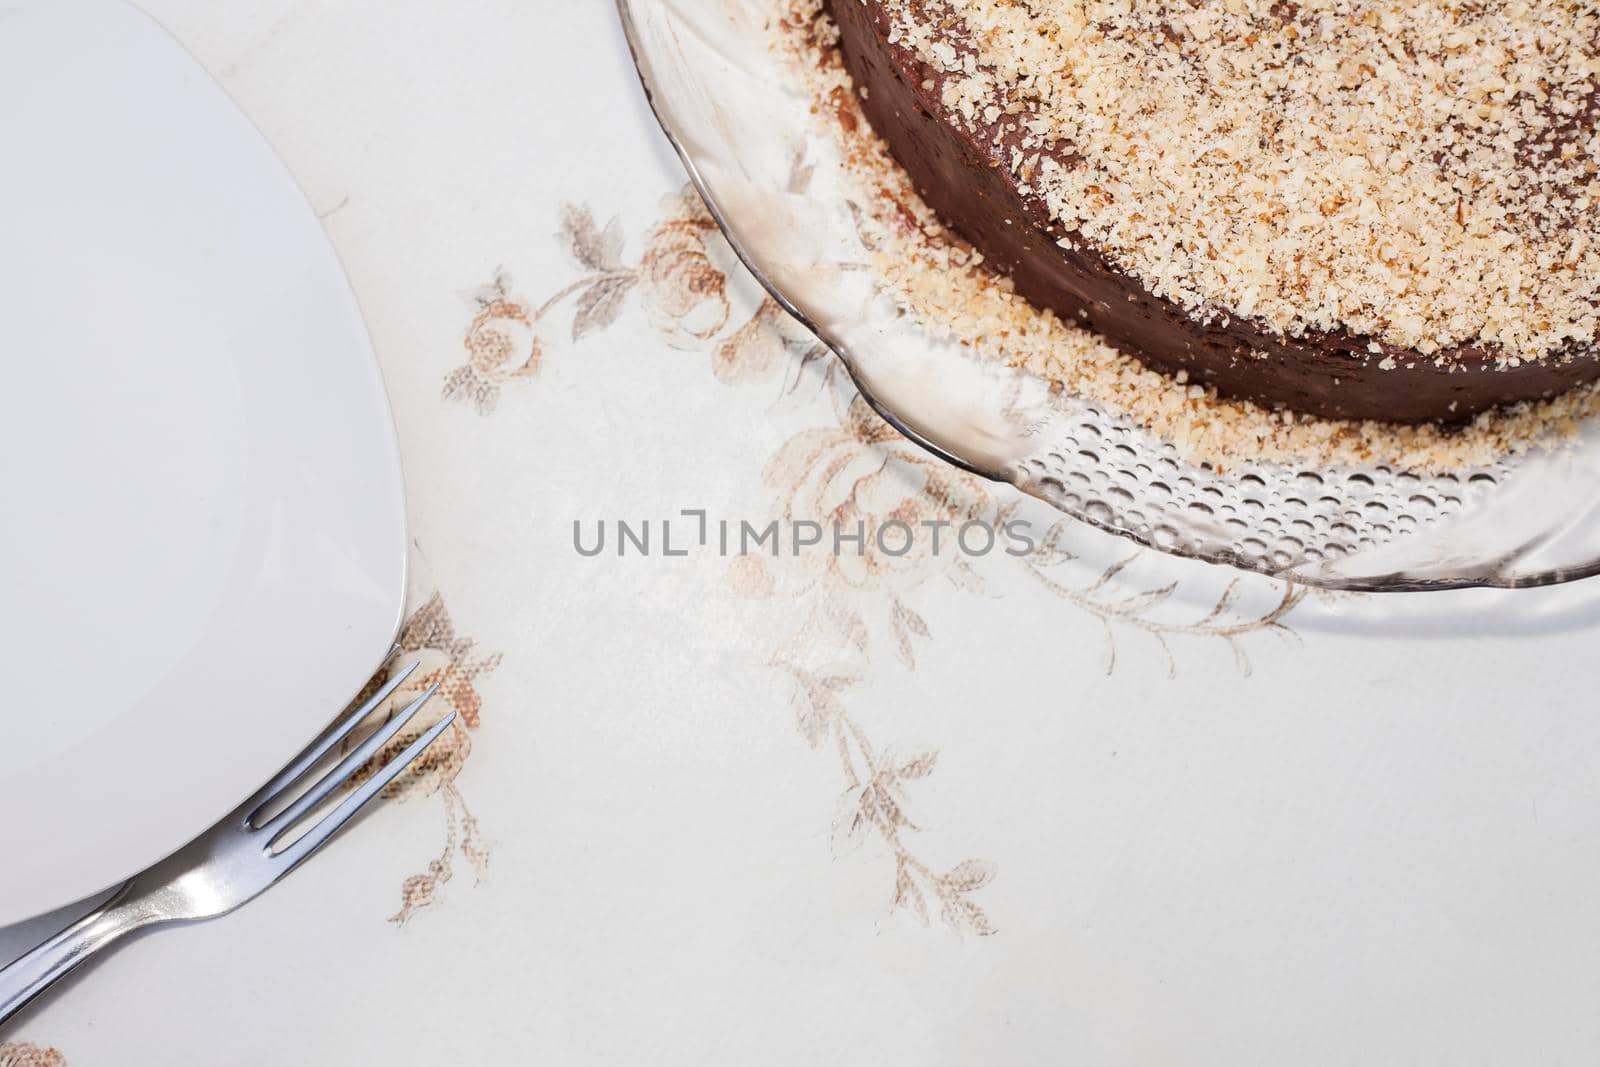 Part of a brown cake sprinkled with light brown chocolate. You can see the fork. Flat lays.